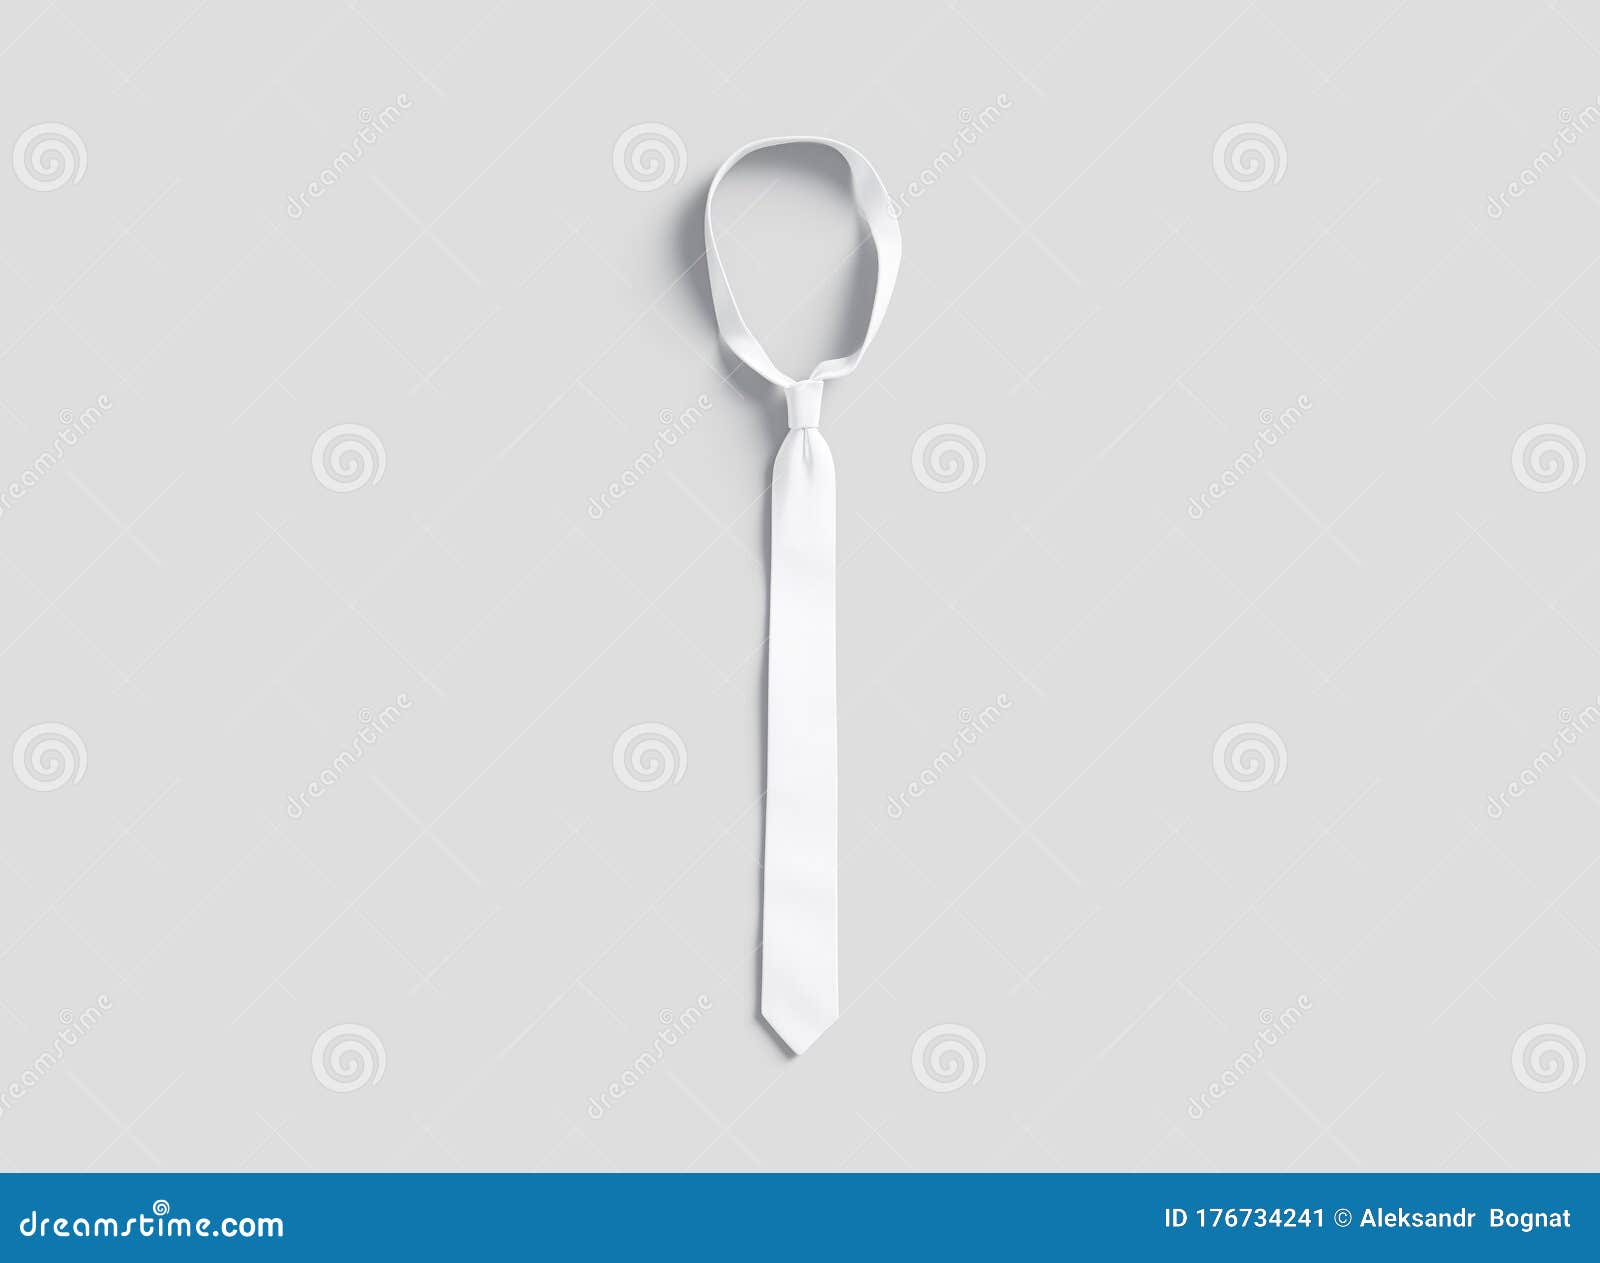 Download Blank White Classic Neck Tie Mock Up, Gray Background ...